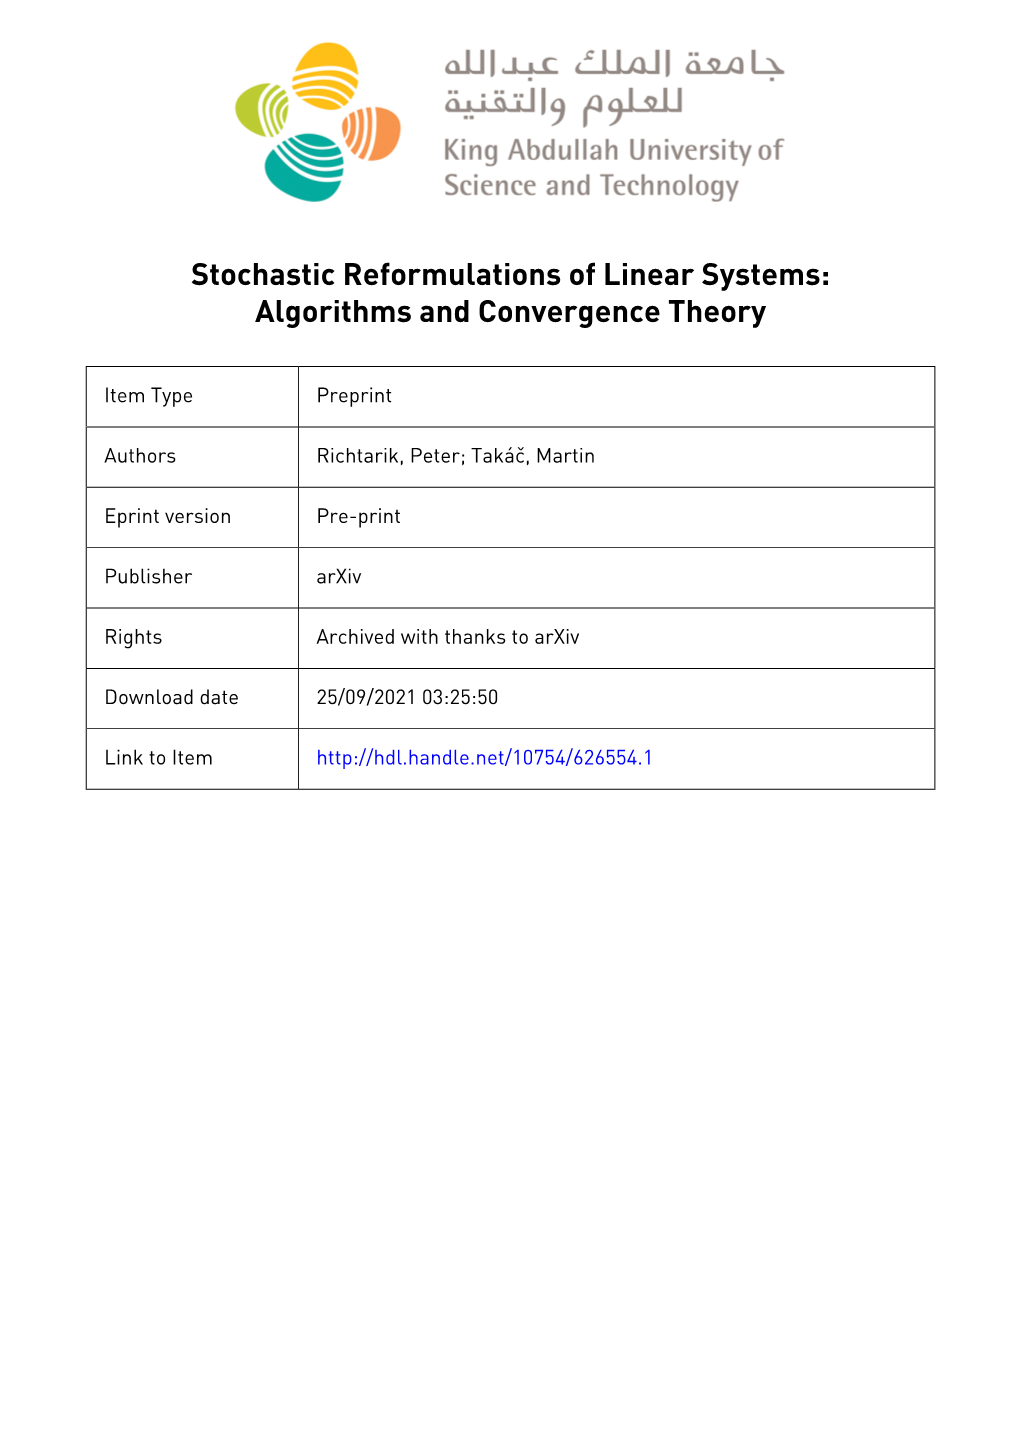 Stochastic Reformulations of Linear Systems: Algorithms and Convergence Theory